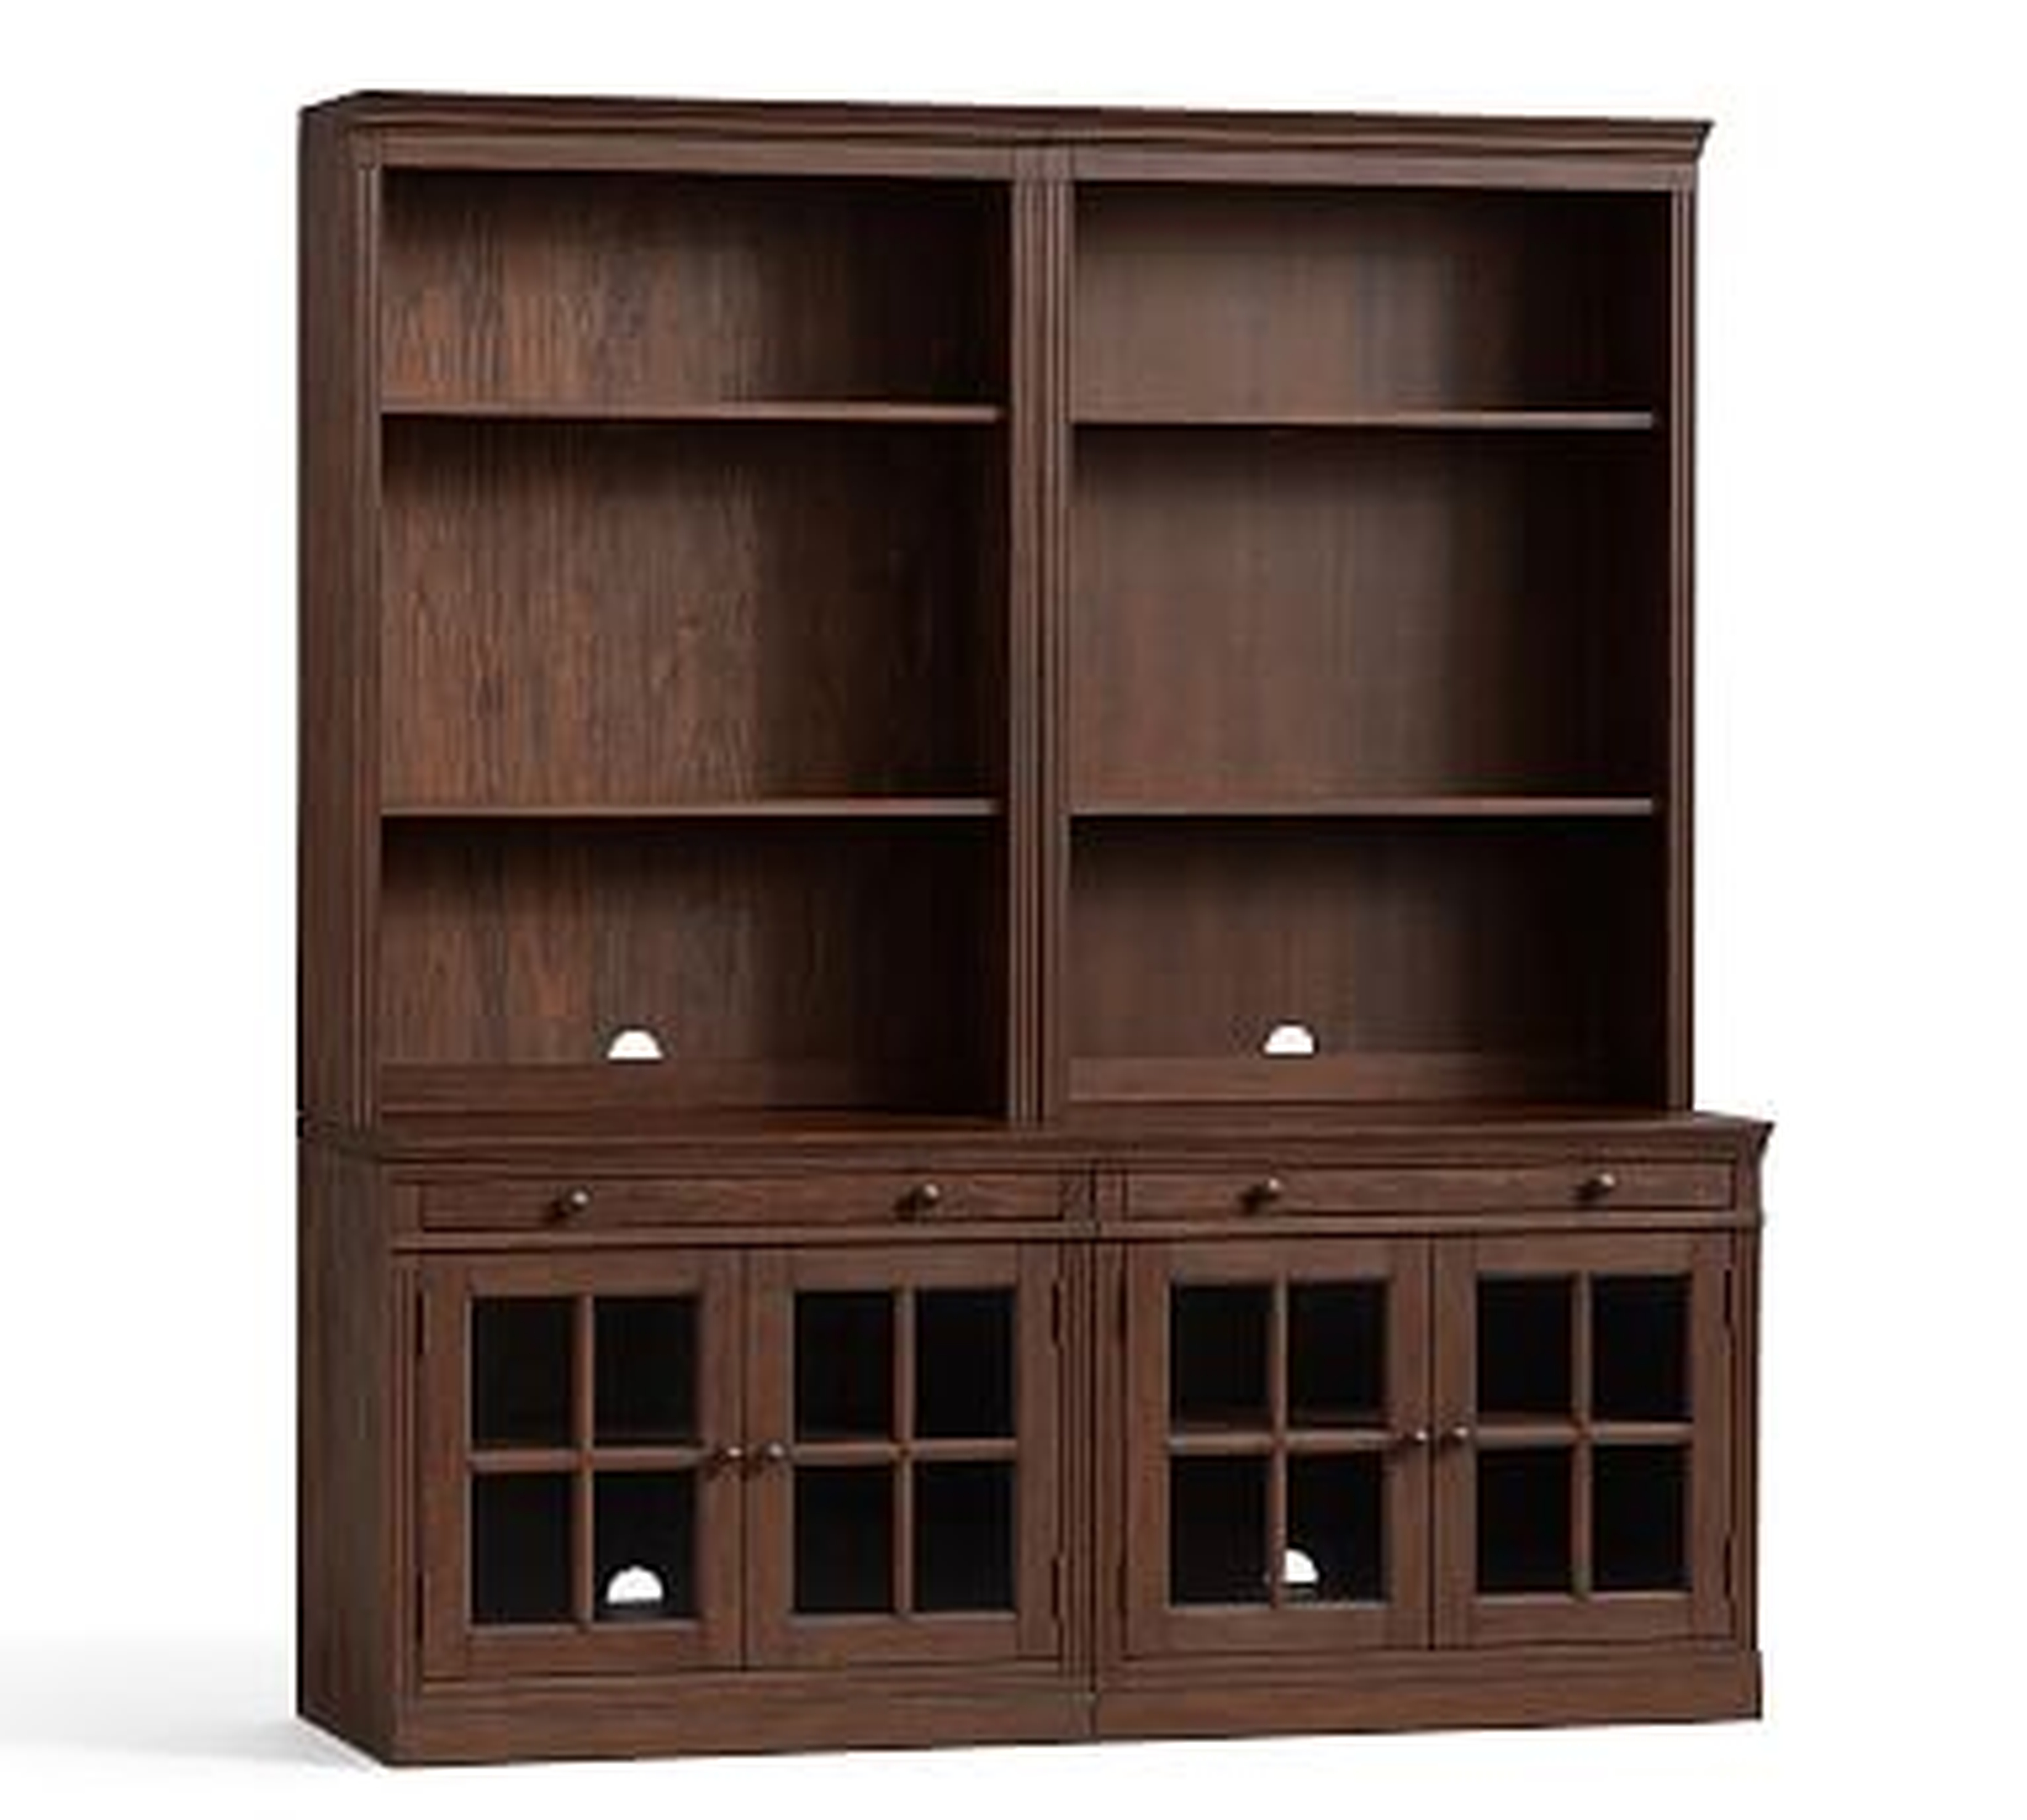 Livingston Bookcase with Glass Cabinets, Brown Wash, 70"L x 81"H - Pottery Barn